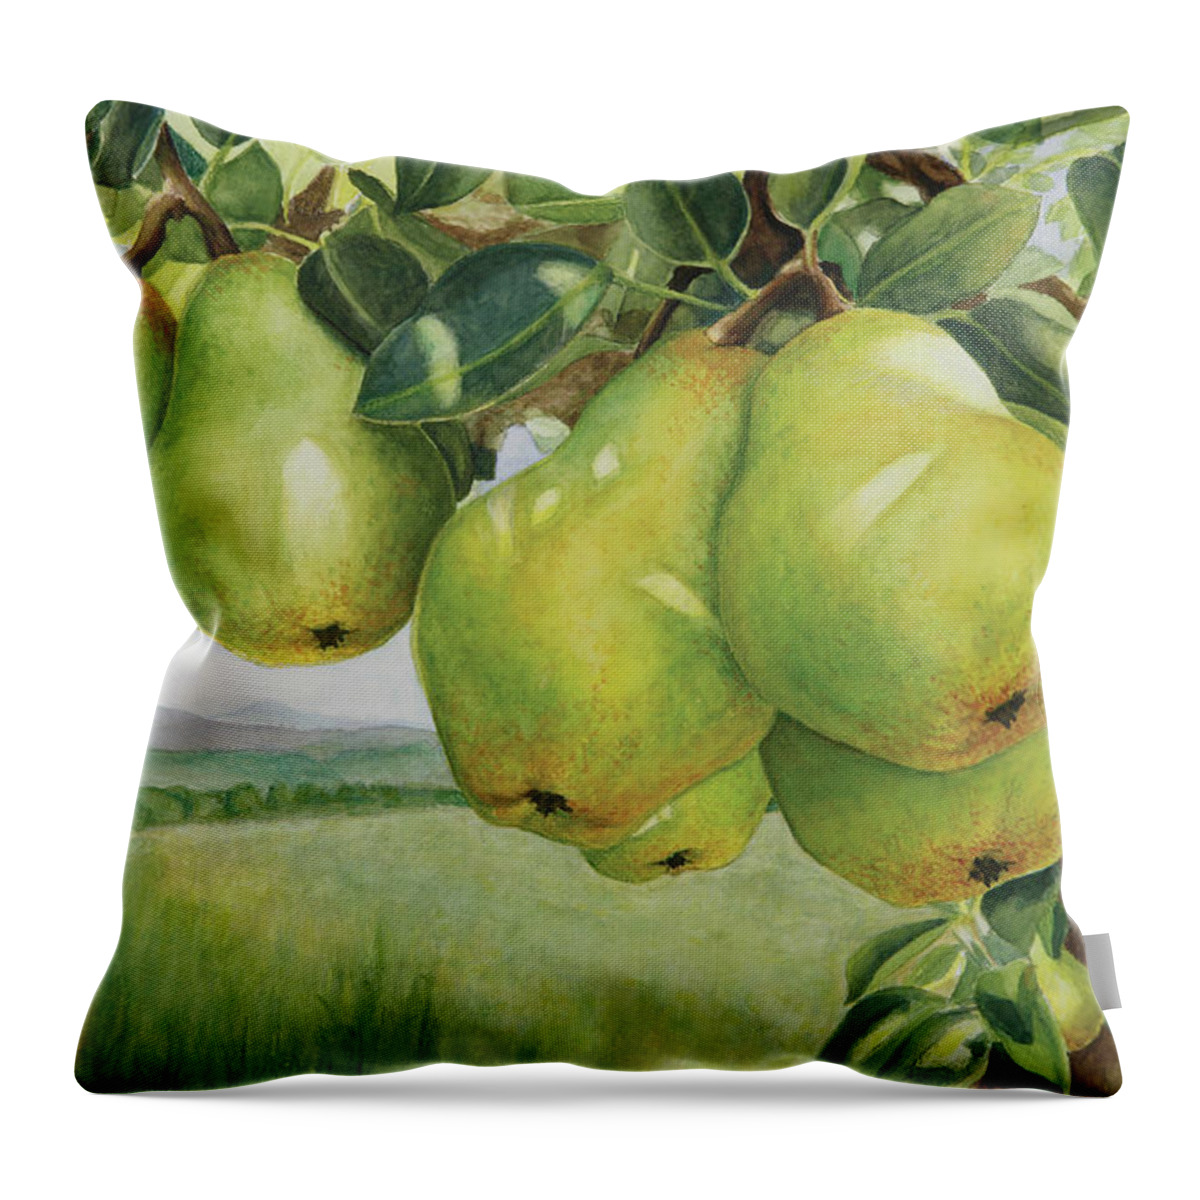 Pears Throw Pillow featuring the painting Pendulous Pears by Tara D Kemp